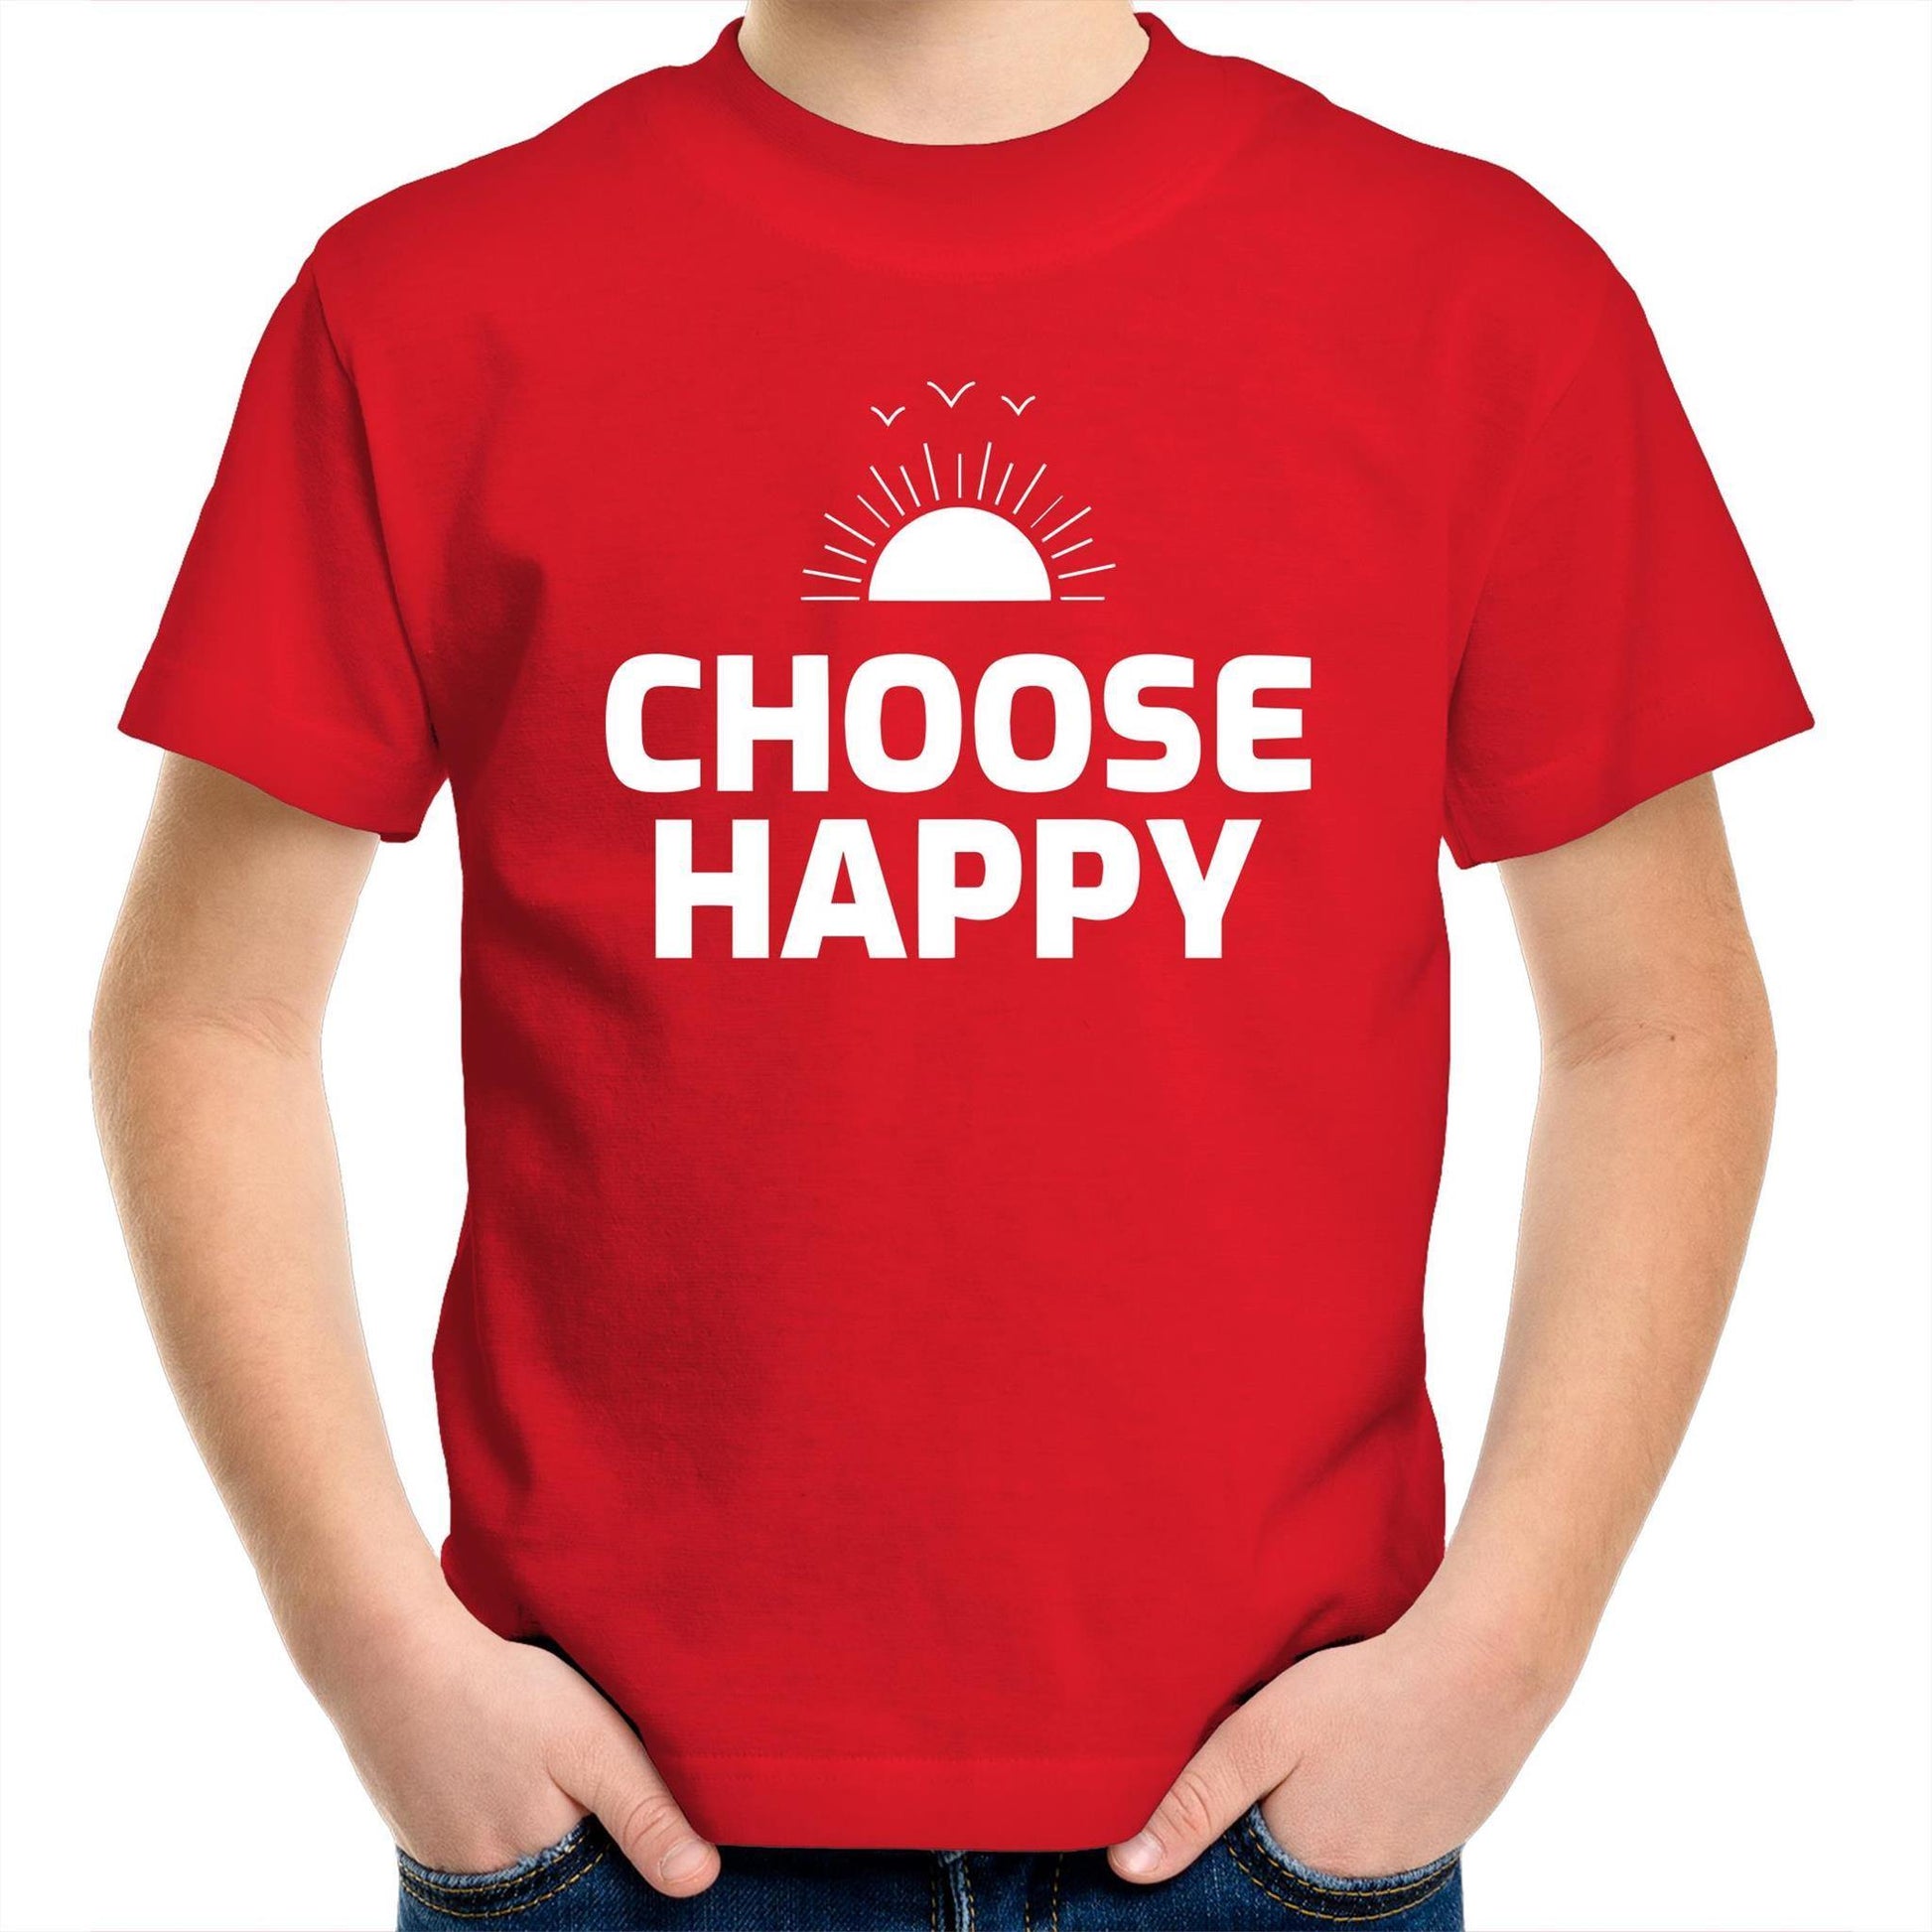 Choose Happy - Kids Youth Crew T-Shirt Red Kids Youth T-shirt